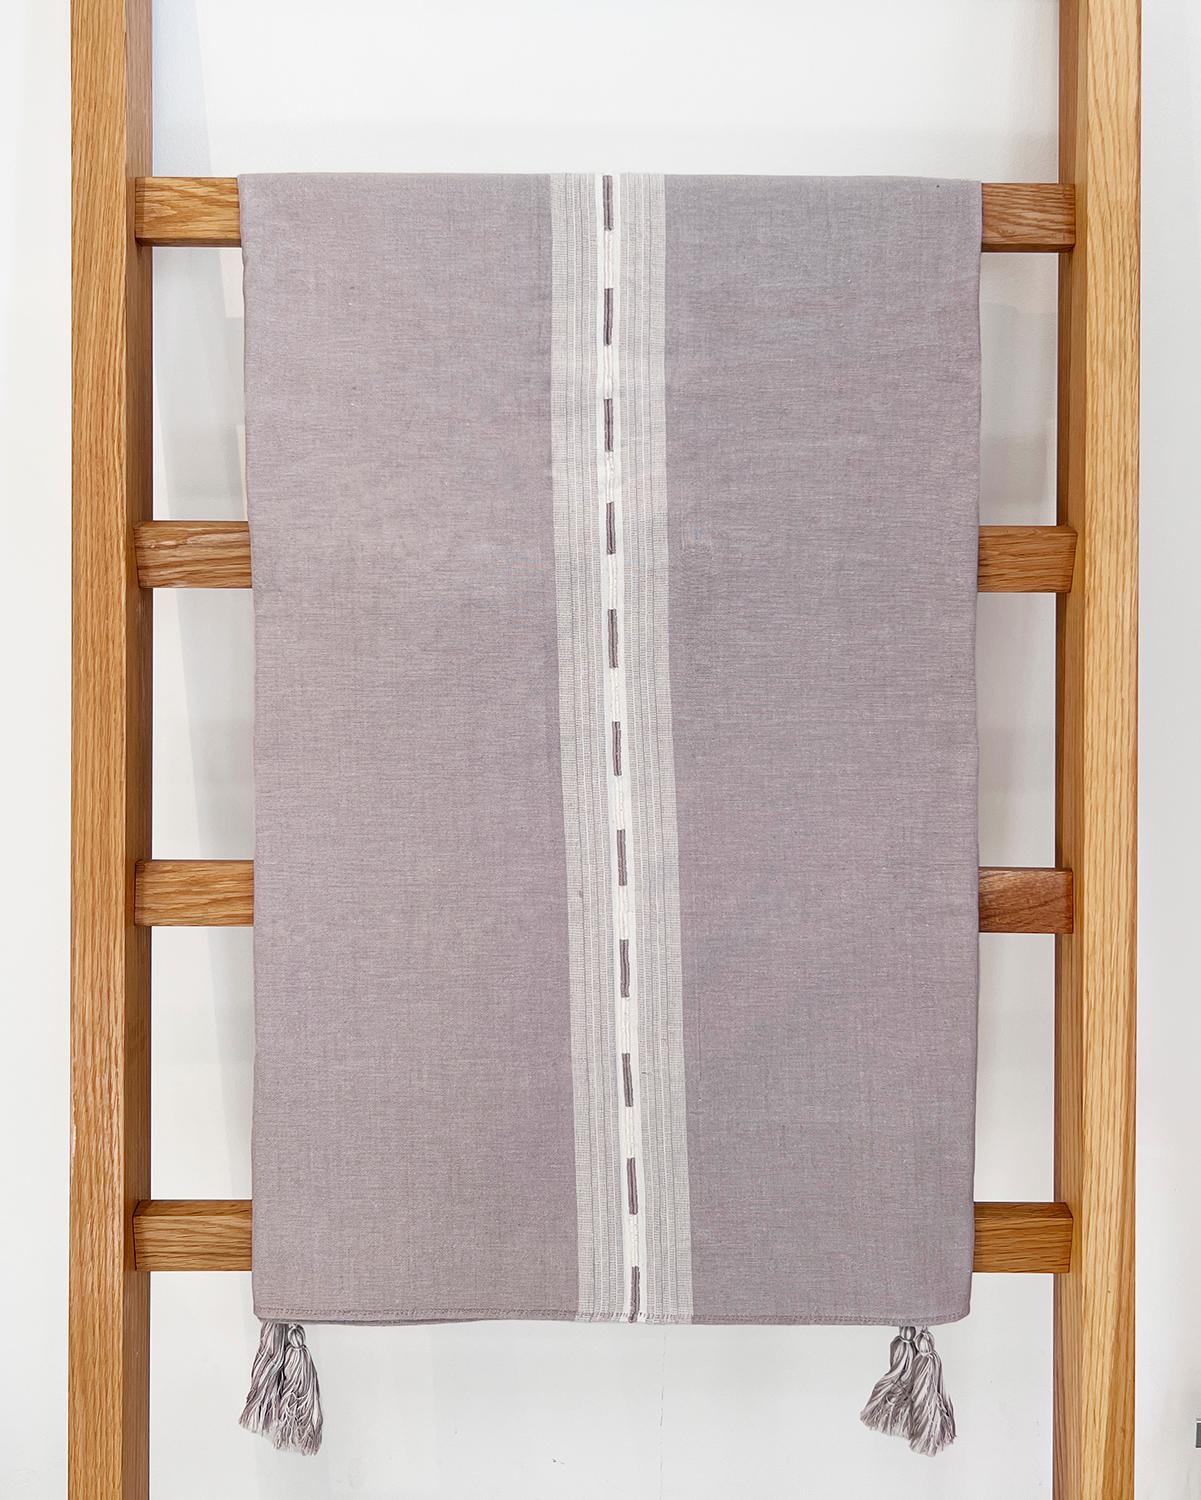 Gray Cotton Tablecloth to elevate your dining experience
This table runner measures 116in by 68in.

This gray striped 100% cotton tablecloth is the perfect home accent for your kitchen or dining room. Great to put on the table at a holiday